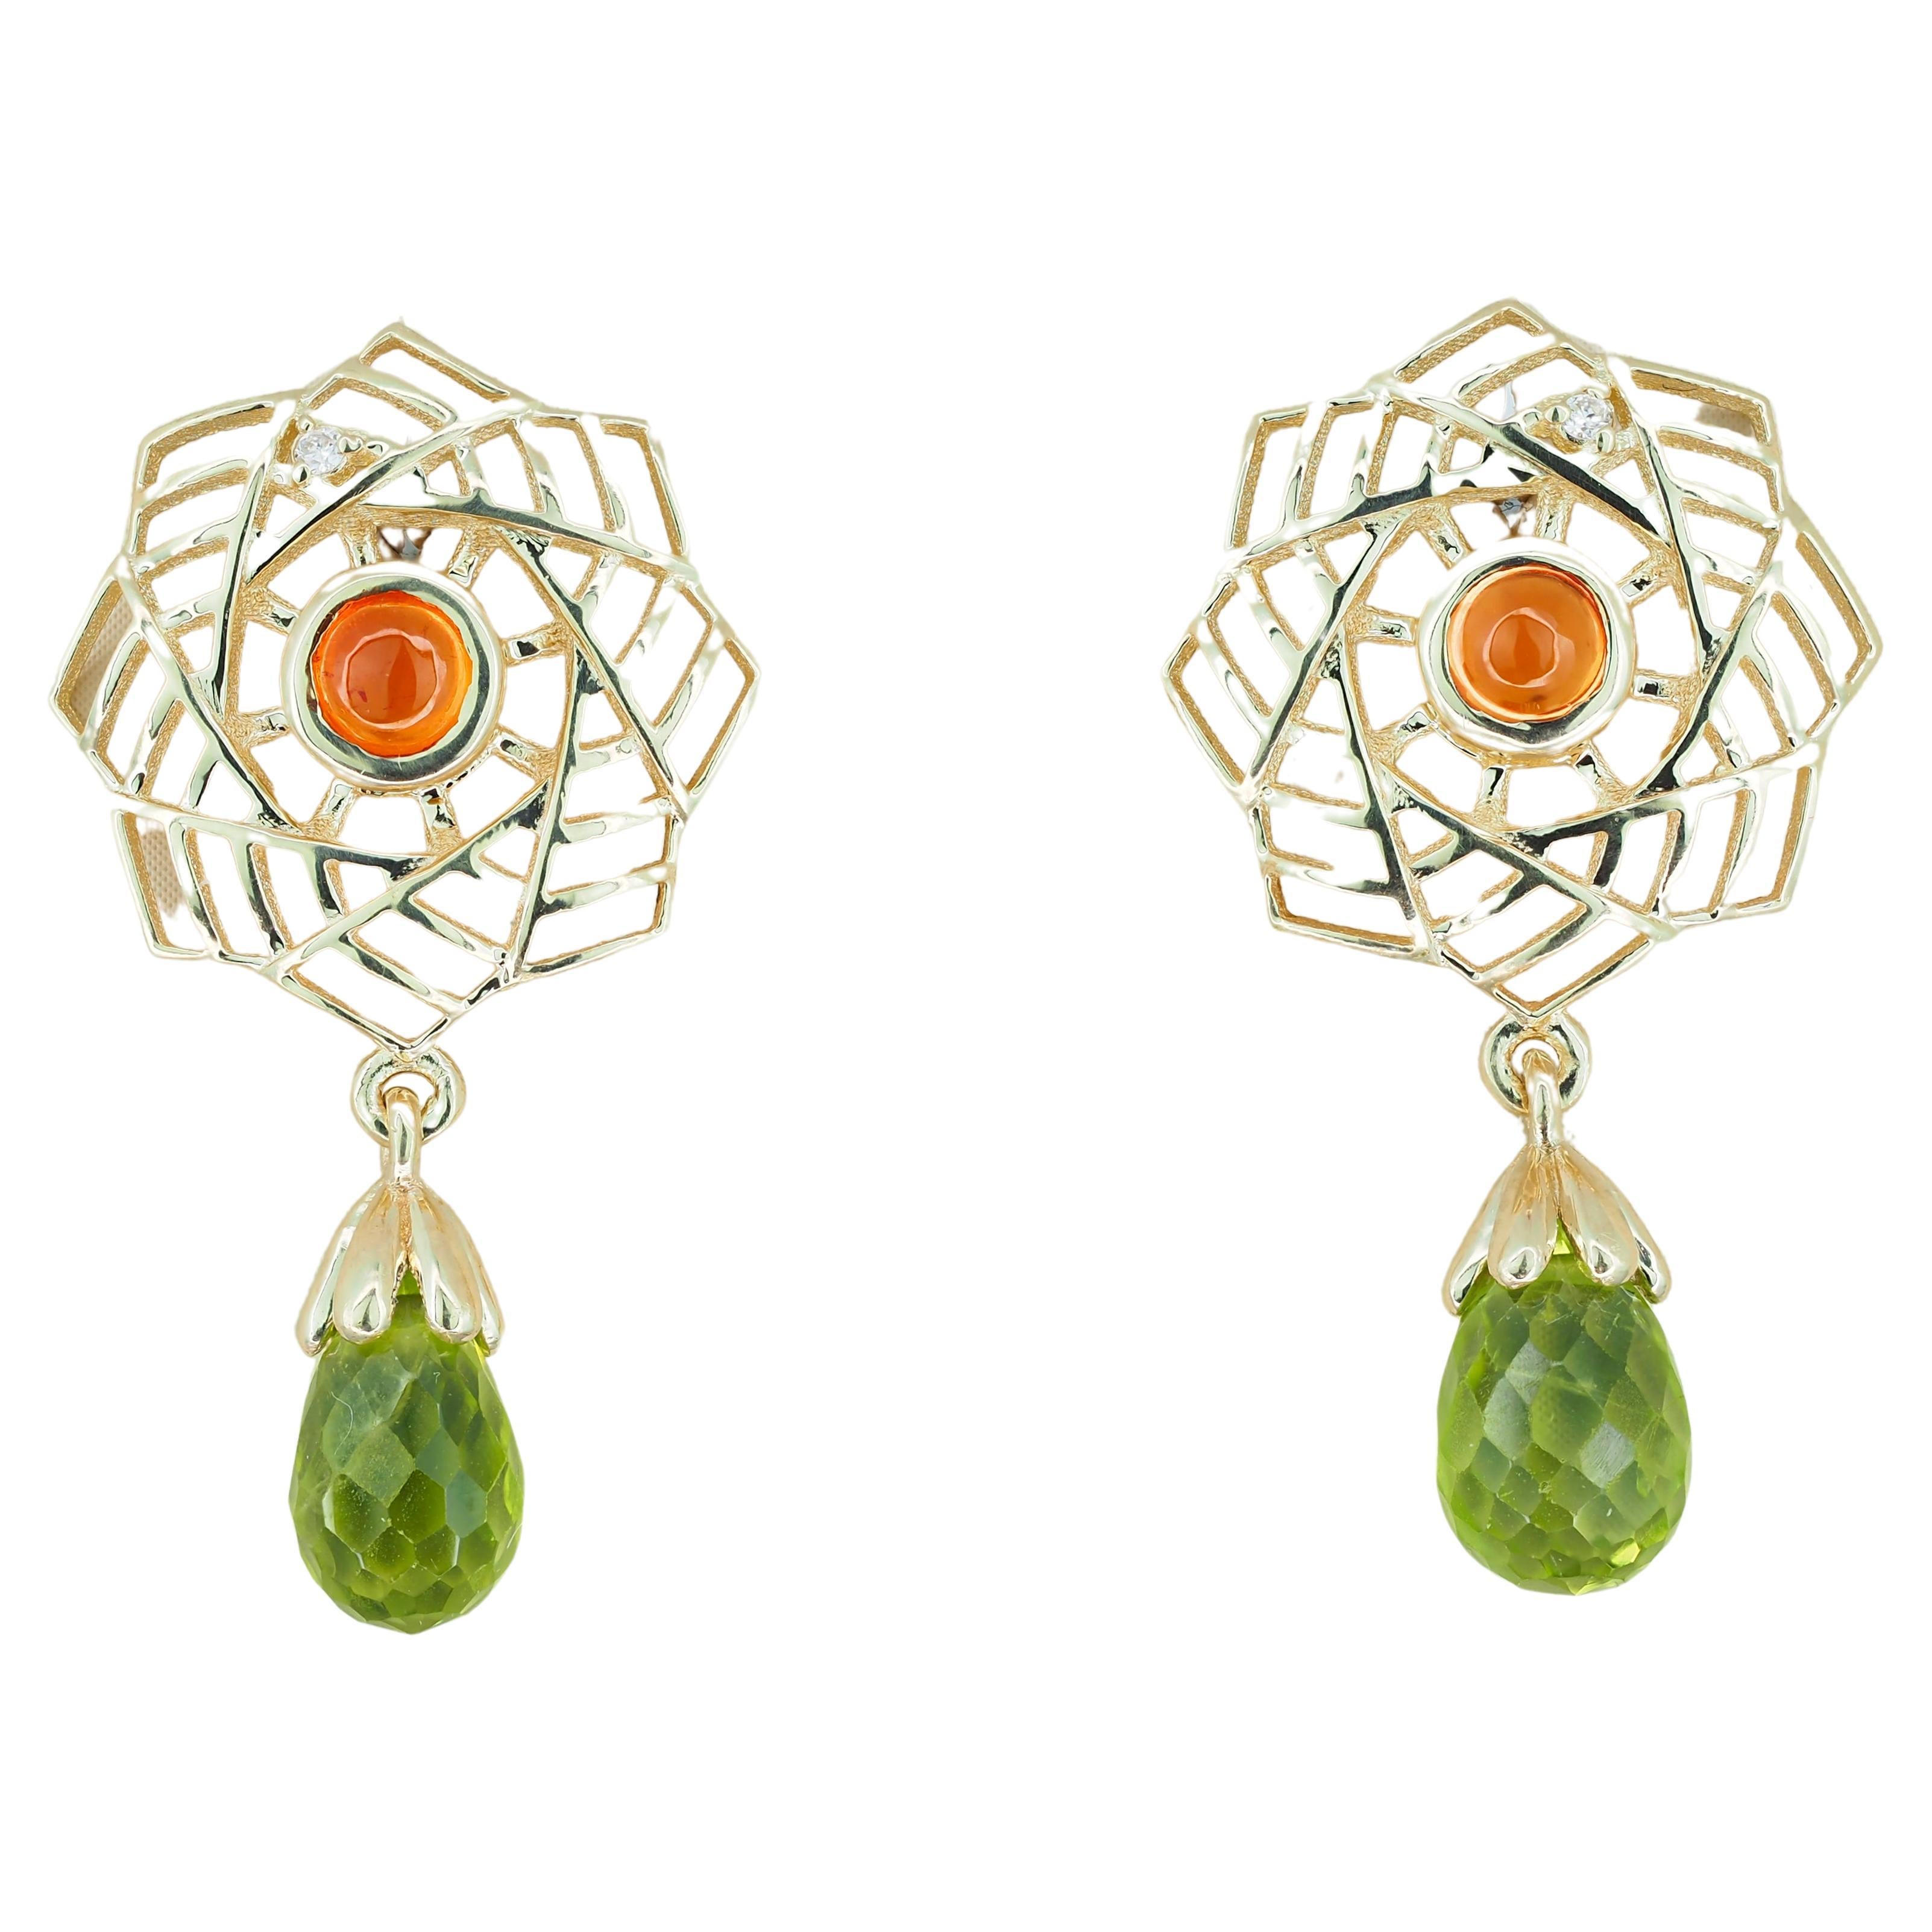 14k gold earrings with peridots, sapphires and diamonds.  For Sale